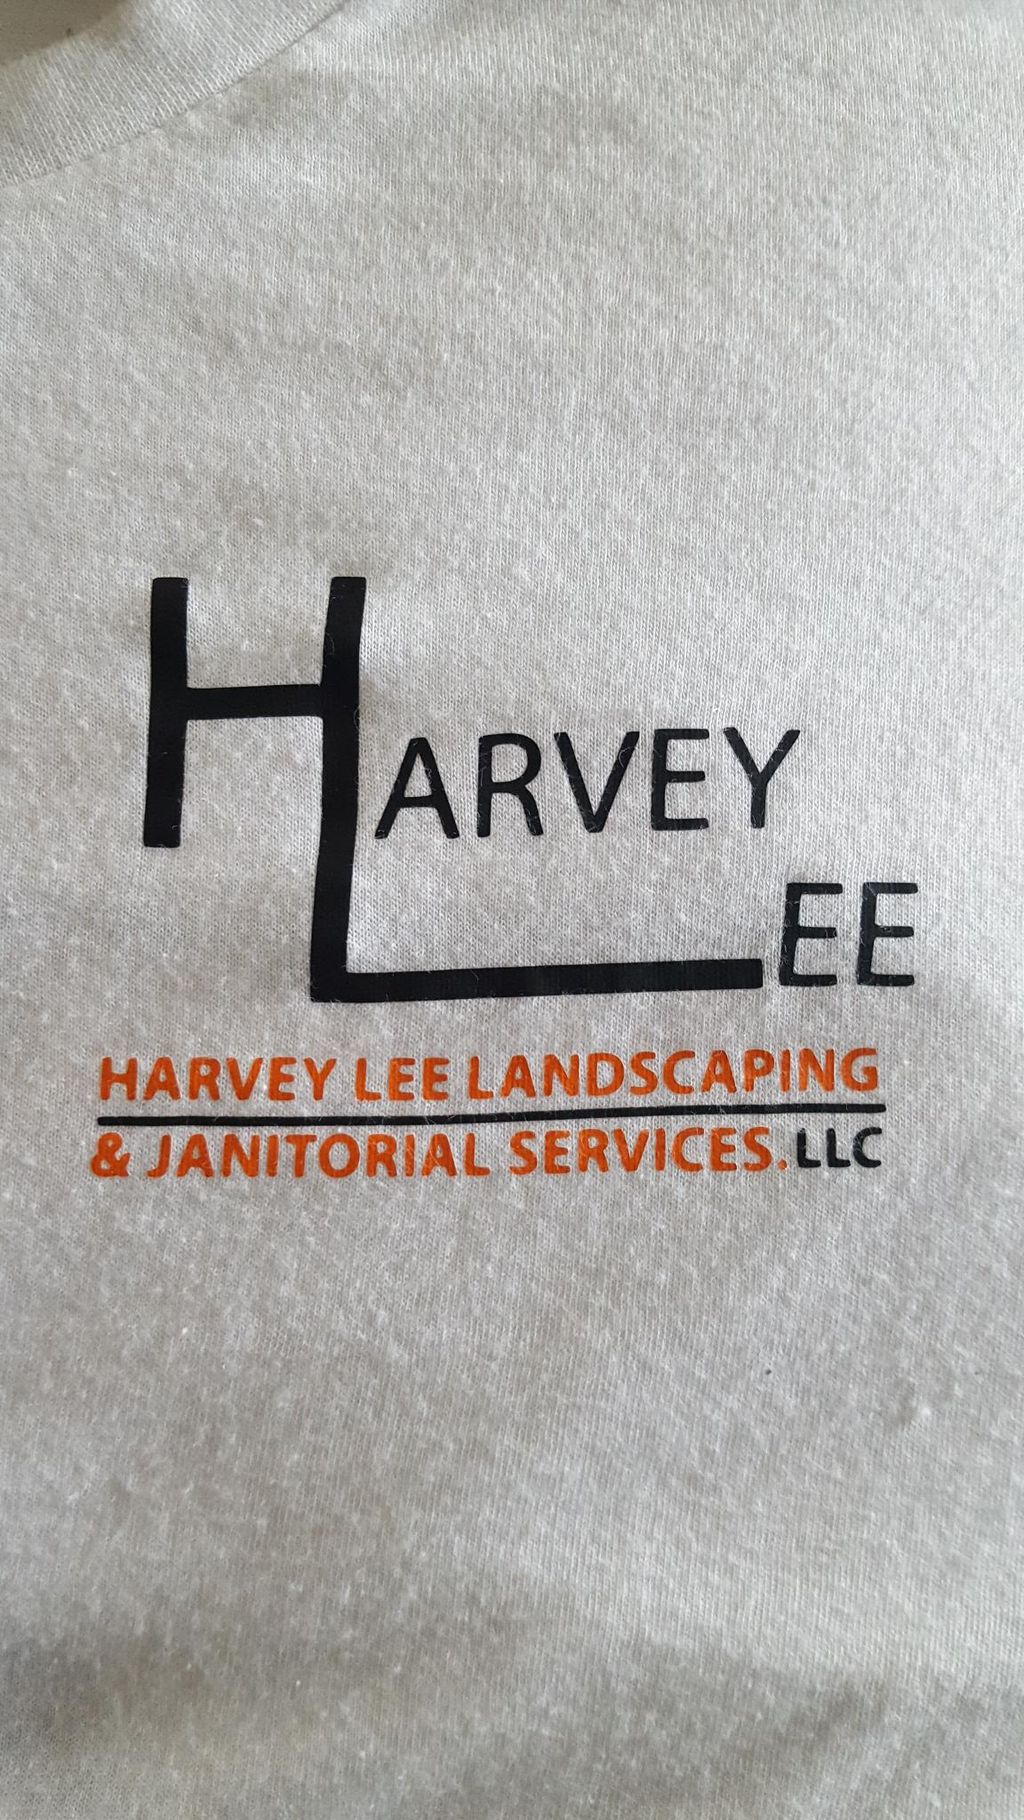 Harvey Lee Landscaping & Janitorial Service LLC